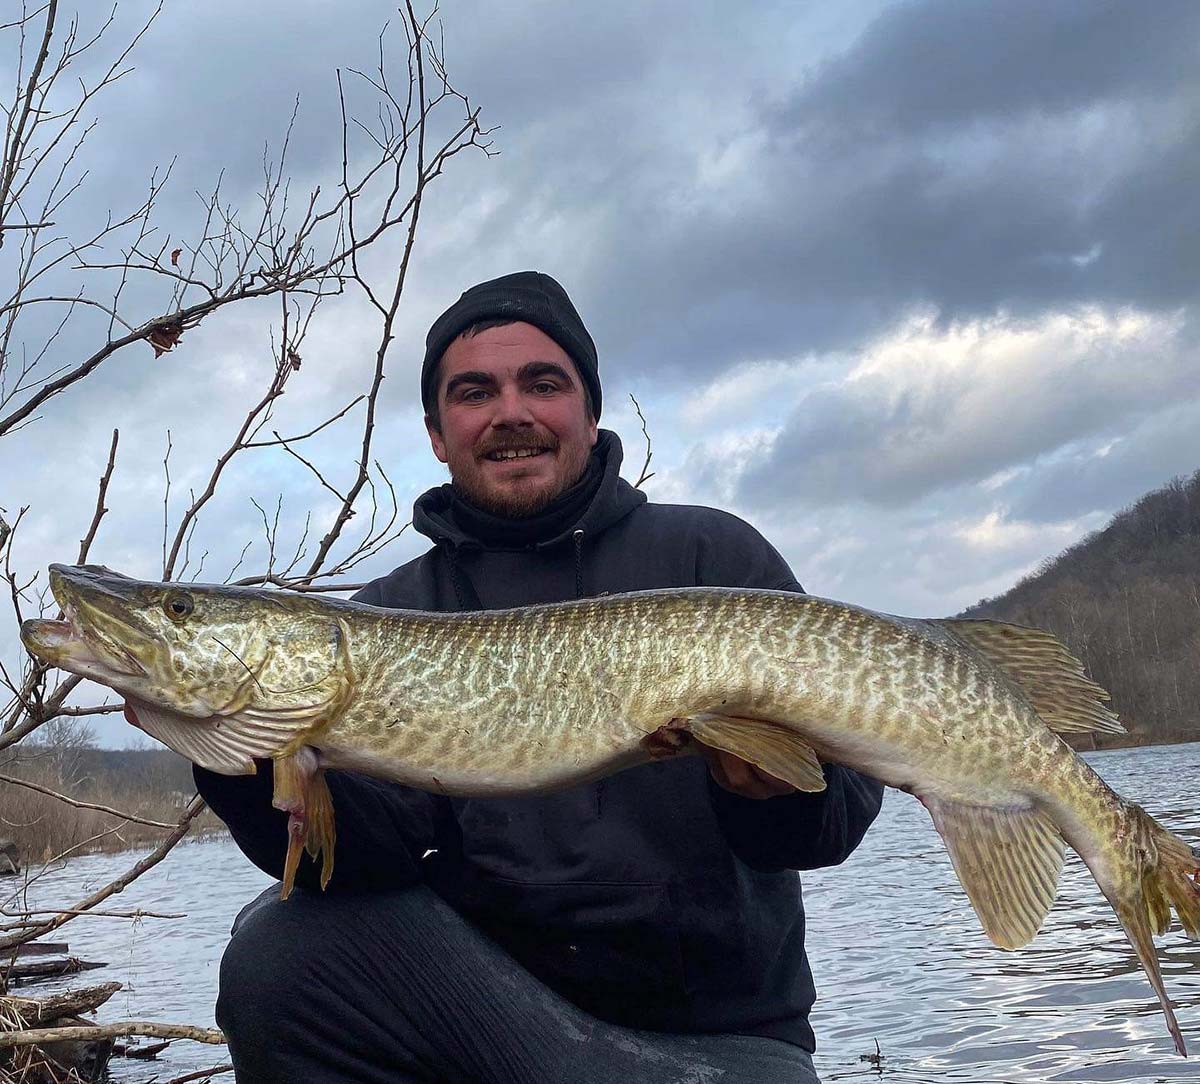 Jersey Muskies: It Shouldn't Take A Thousand Casts - The Fisherman